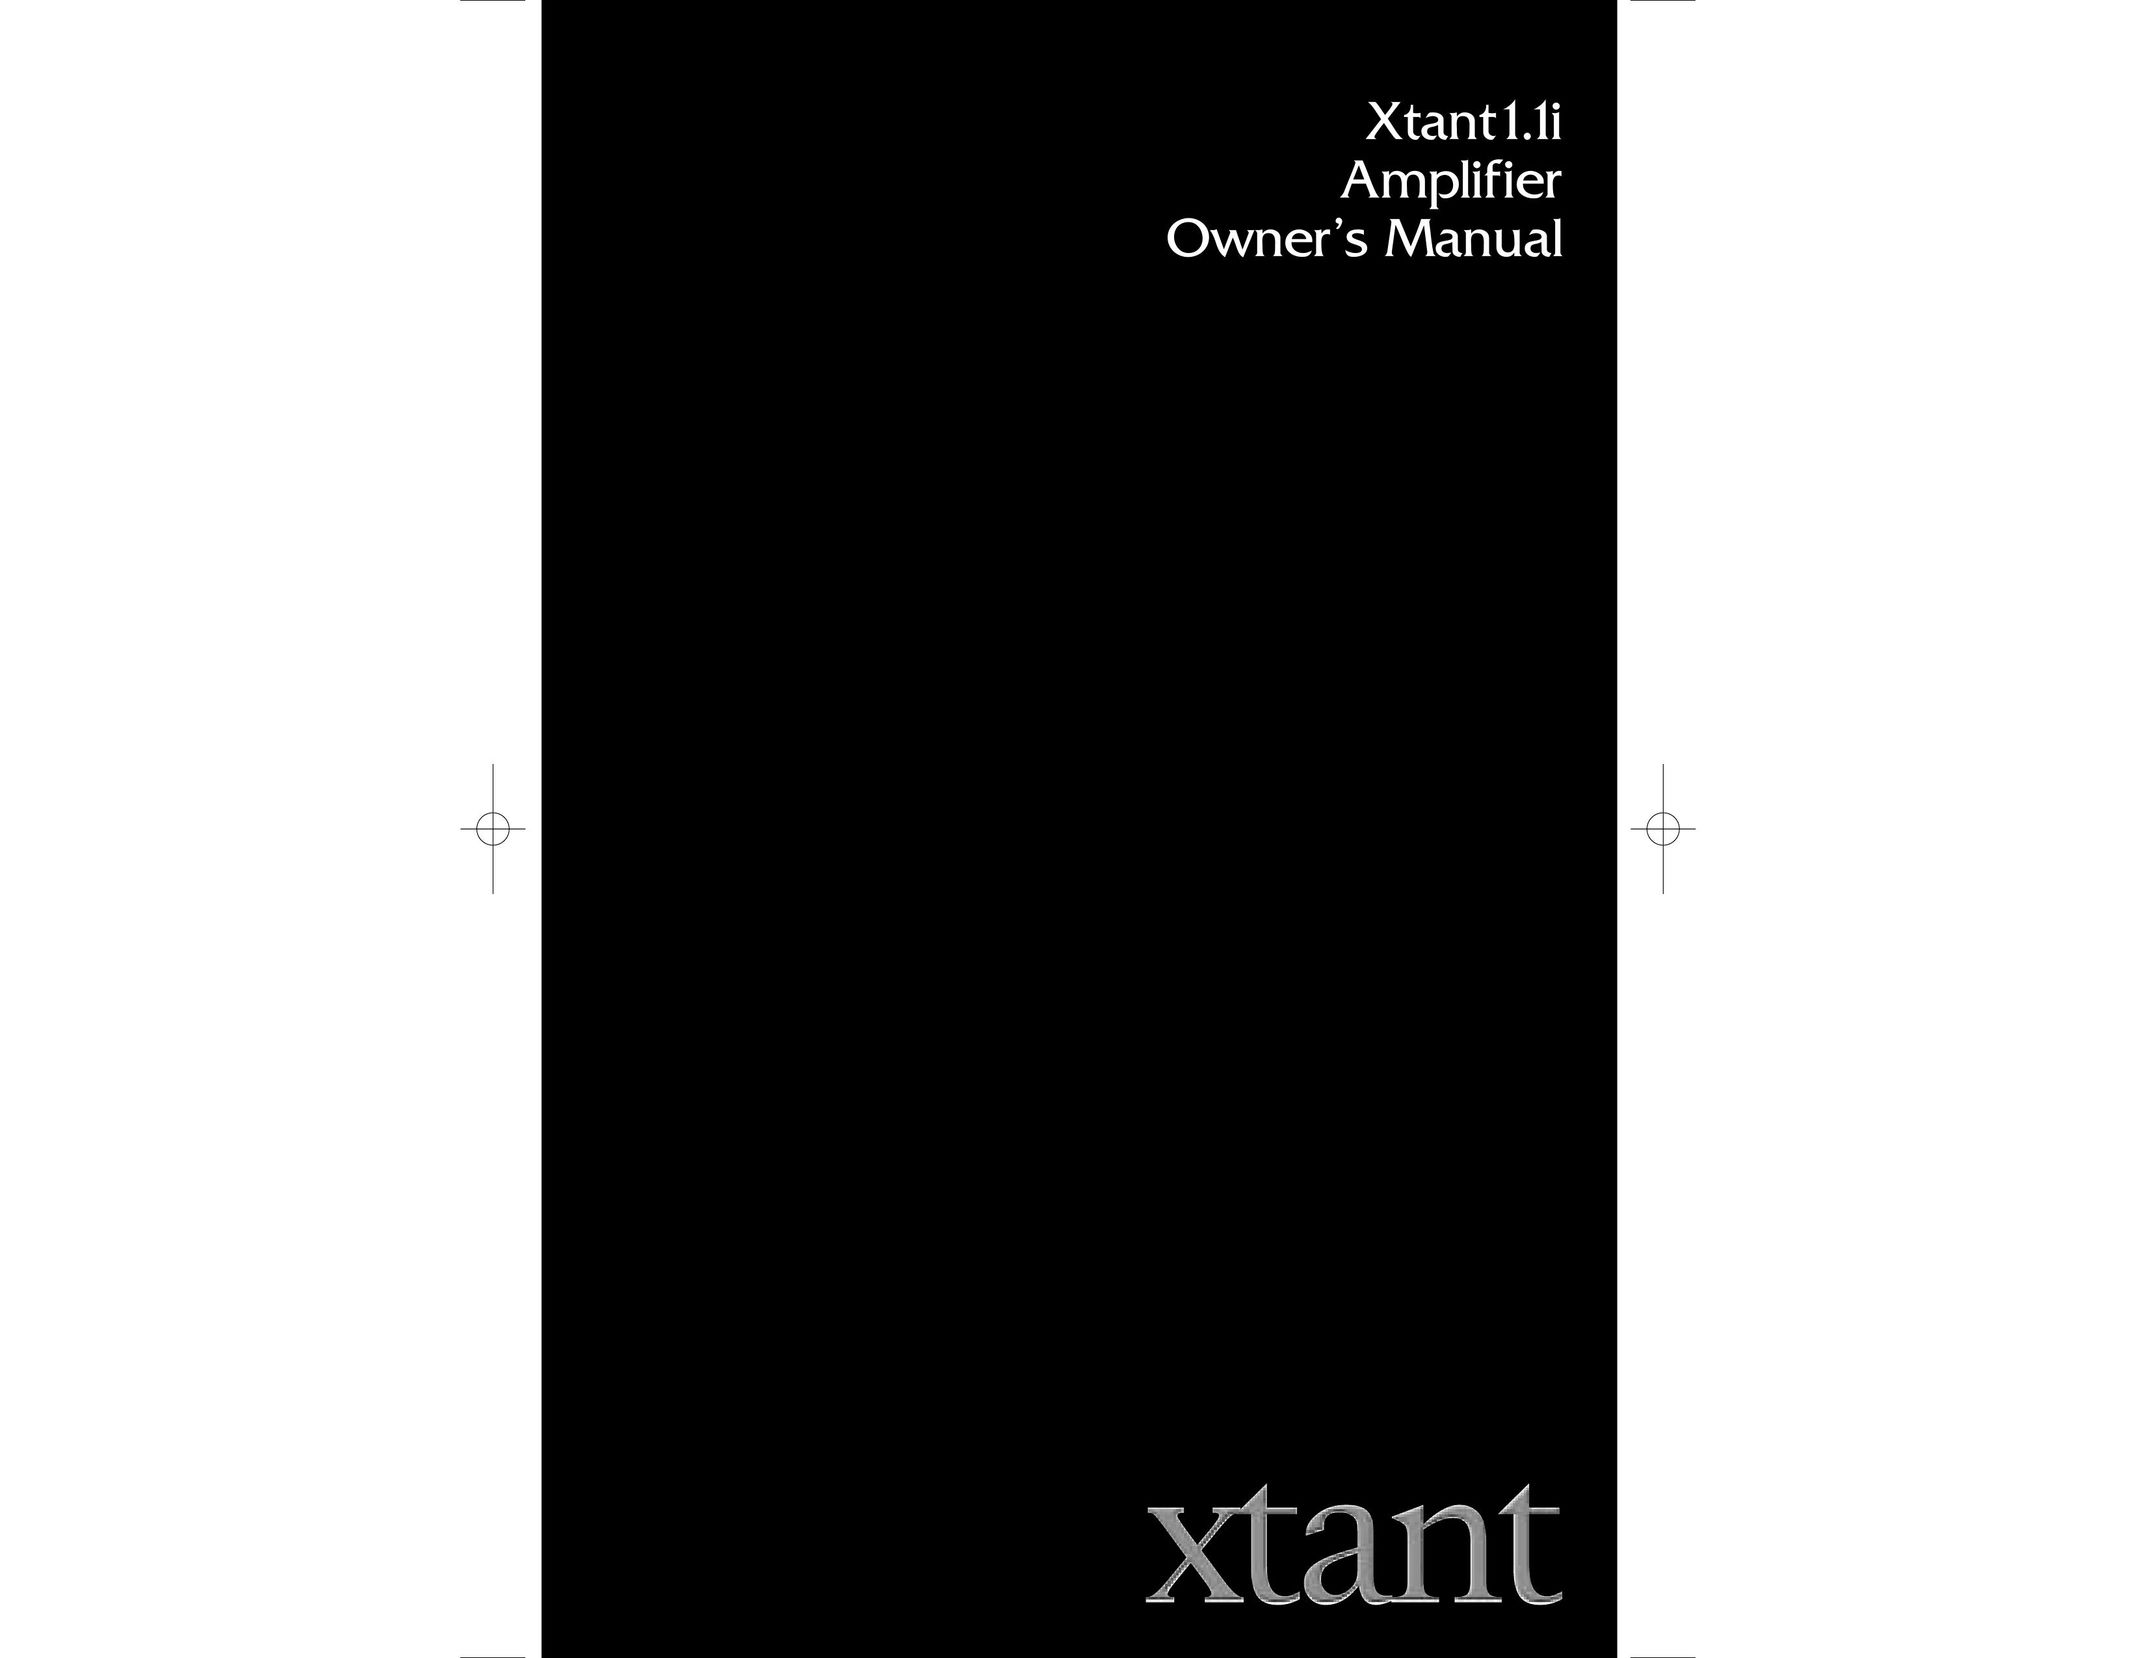 Xtant 1.1 Stereo Amplifier User Manual